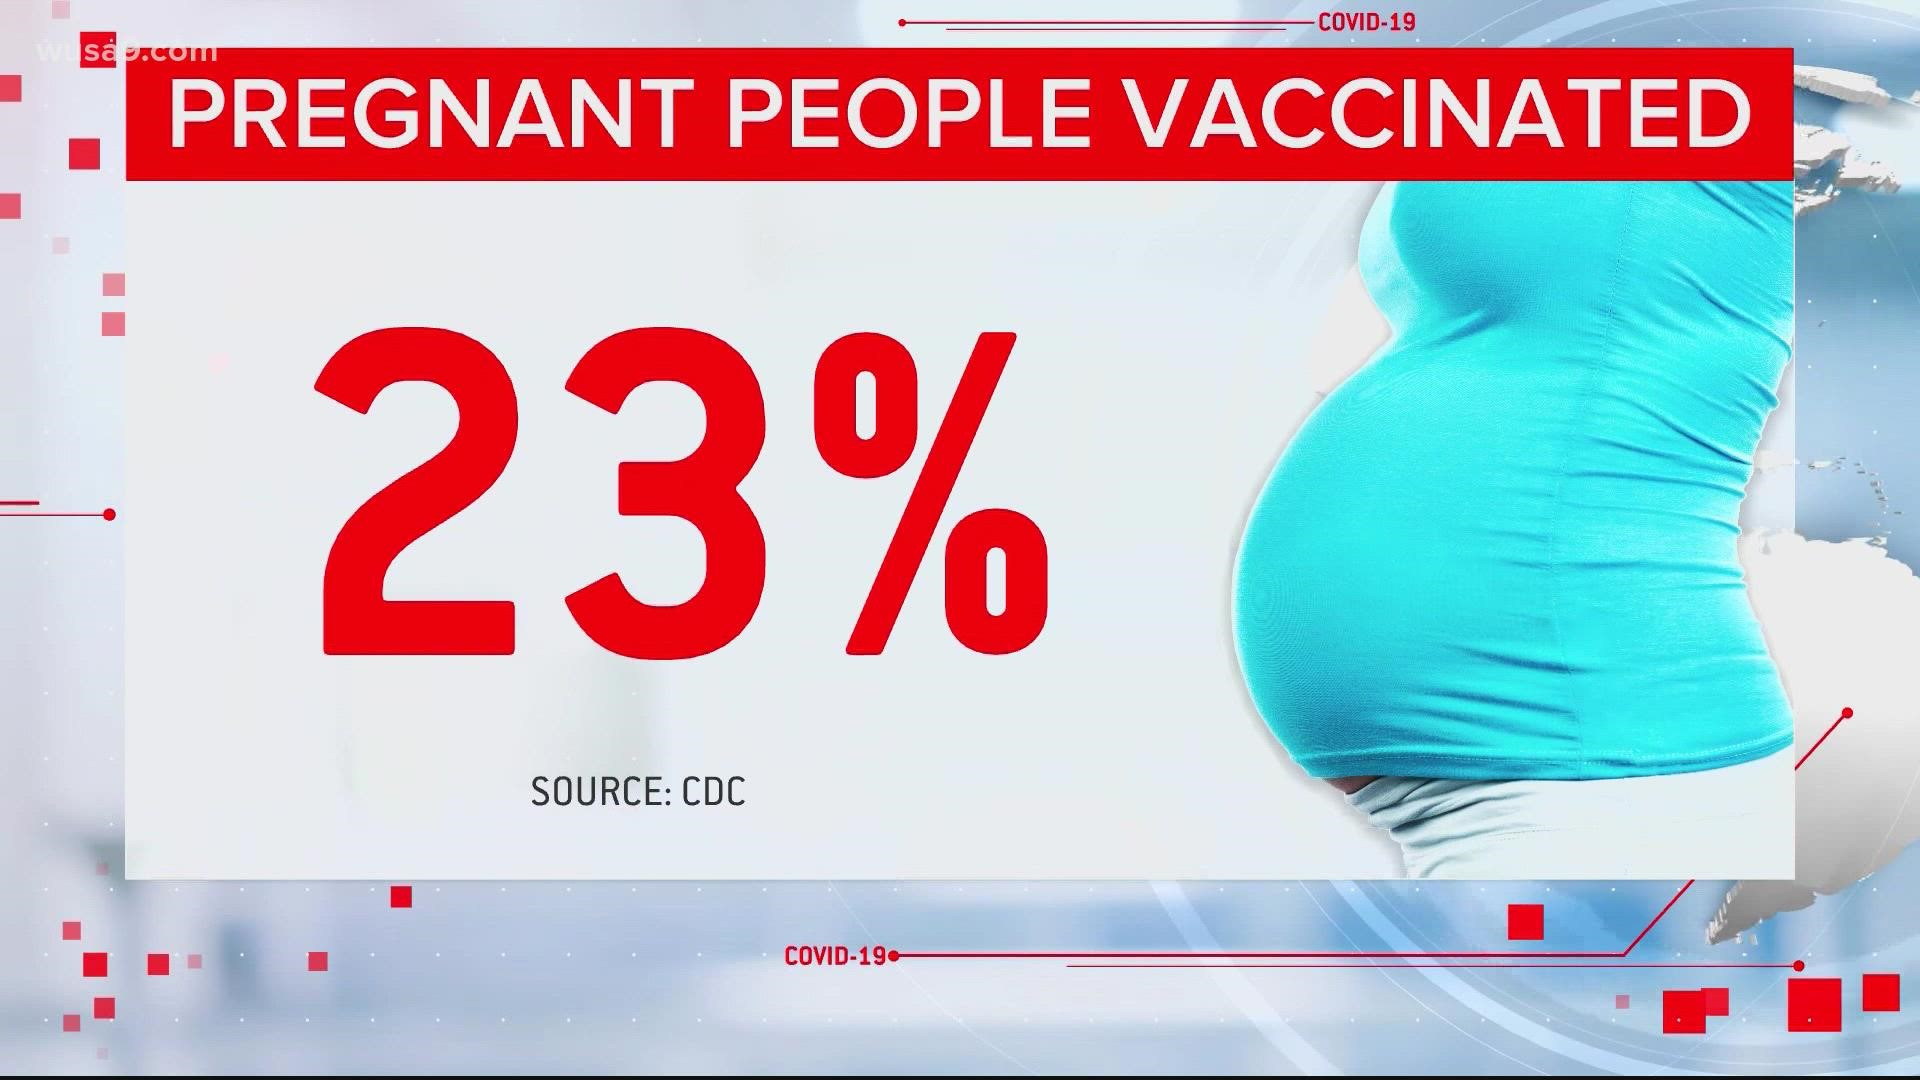 Pregnant women run a higher risk of severe illness from the coronavirus. But their vaccination rates are low.